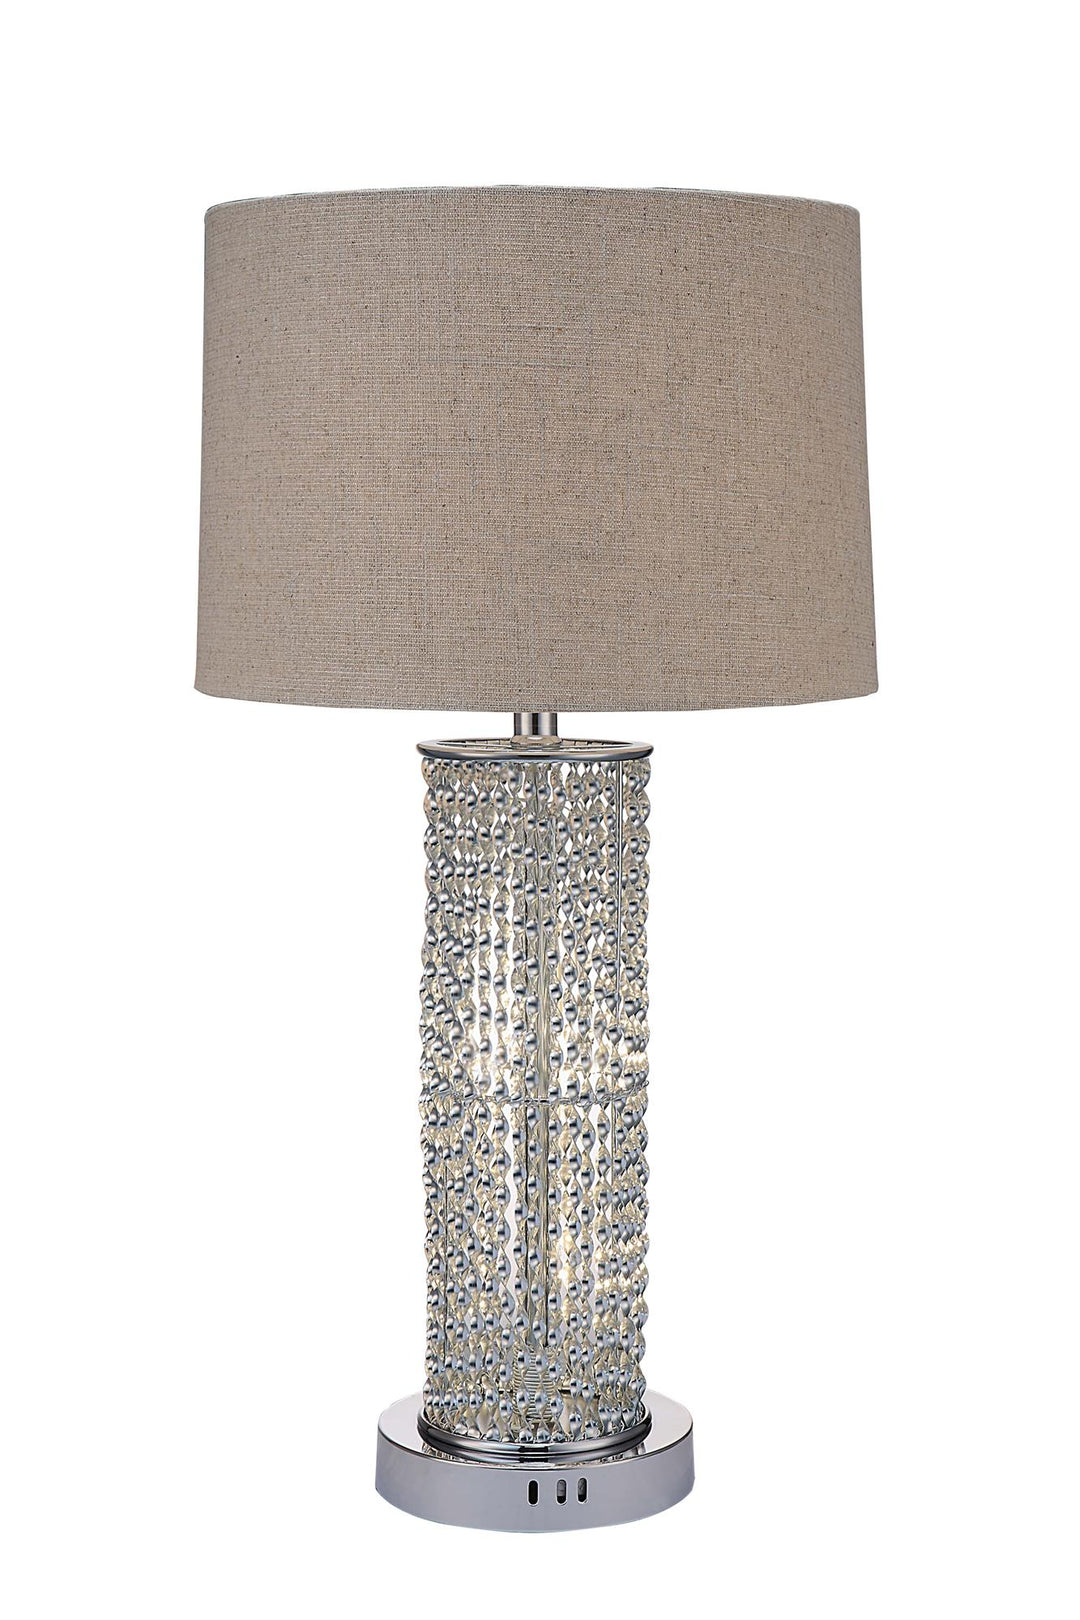 Britt Table Lamp with Twisted Metal Base and 4-Way Rotary Switch - Chrome